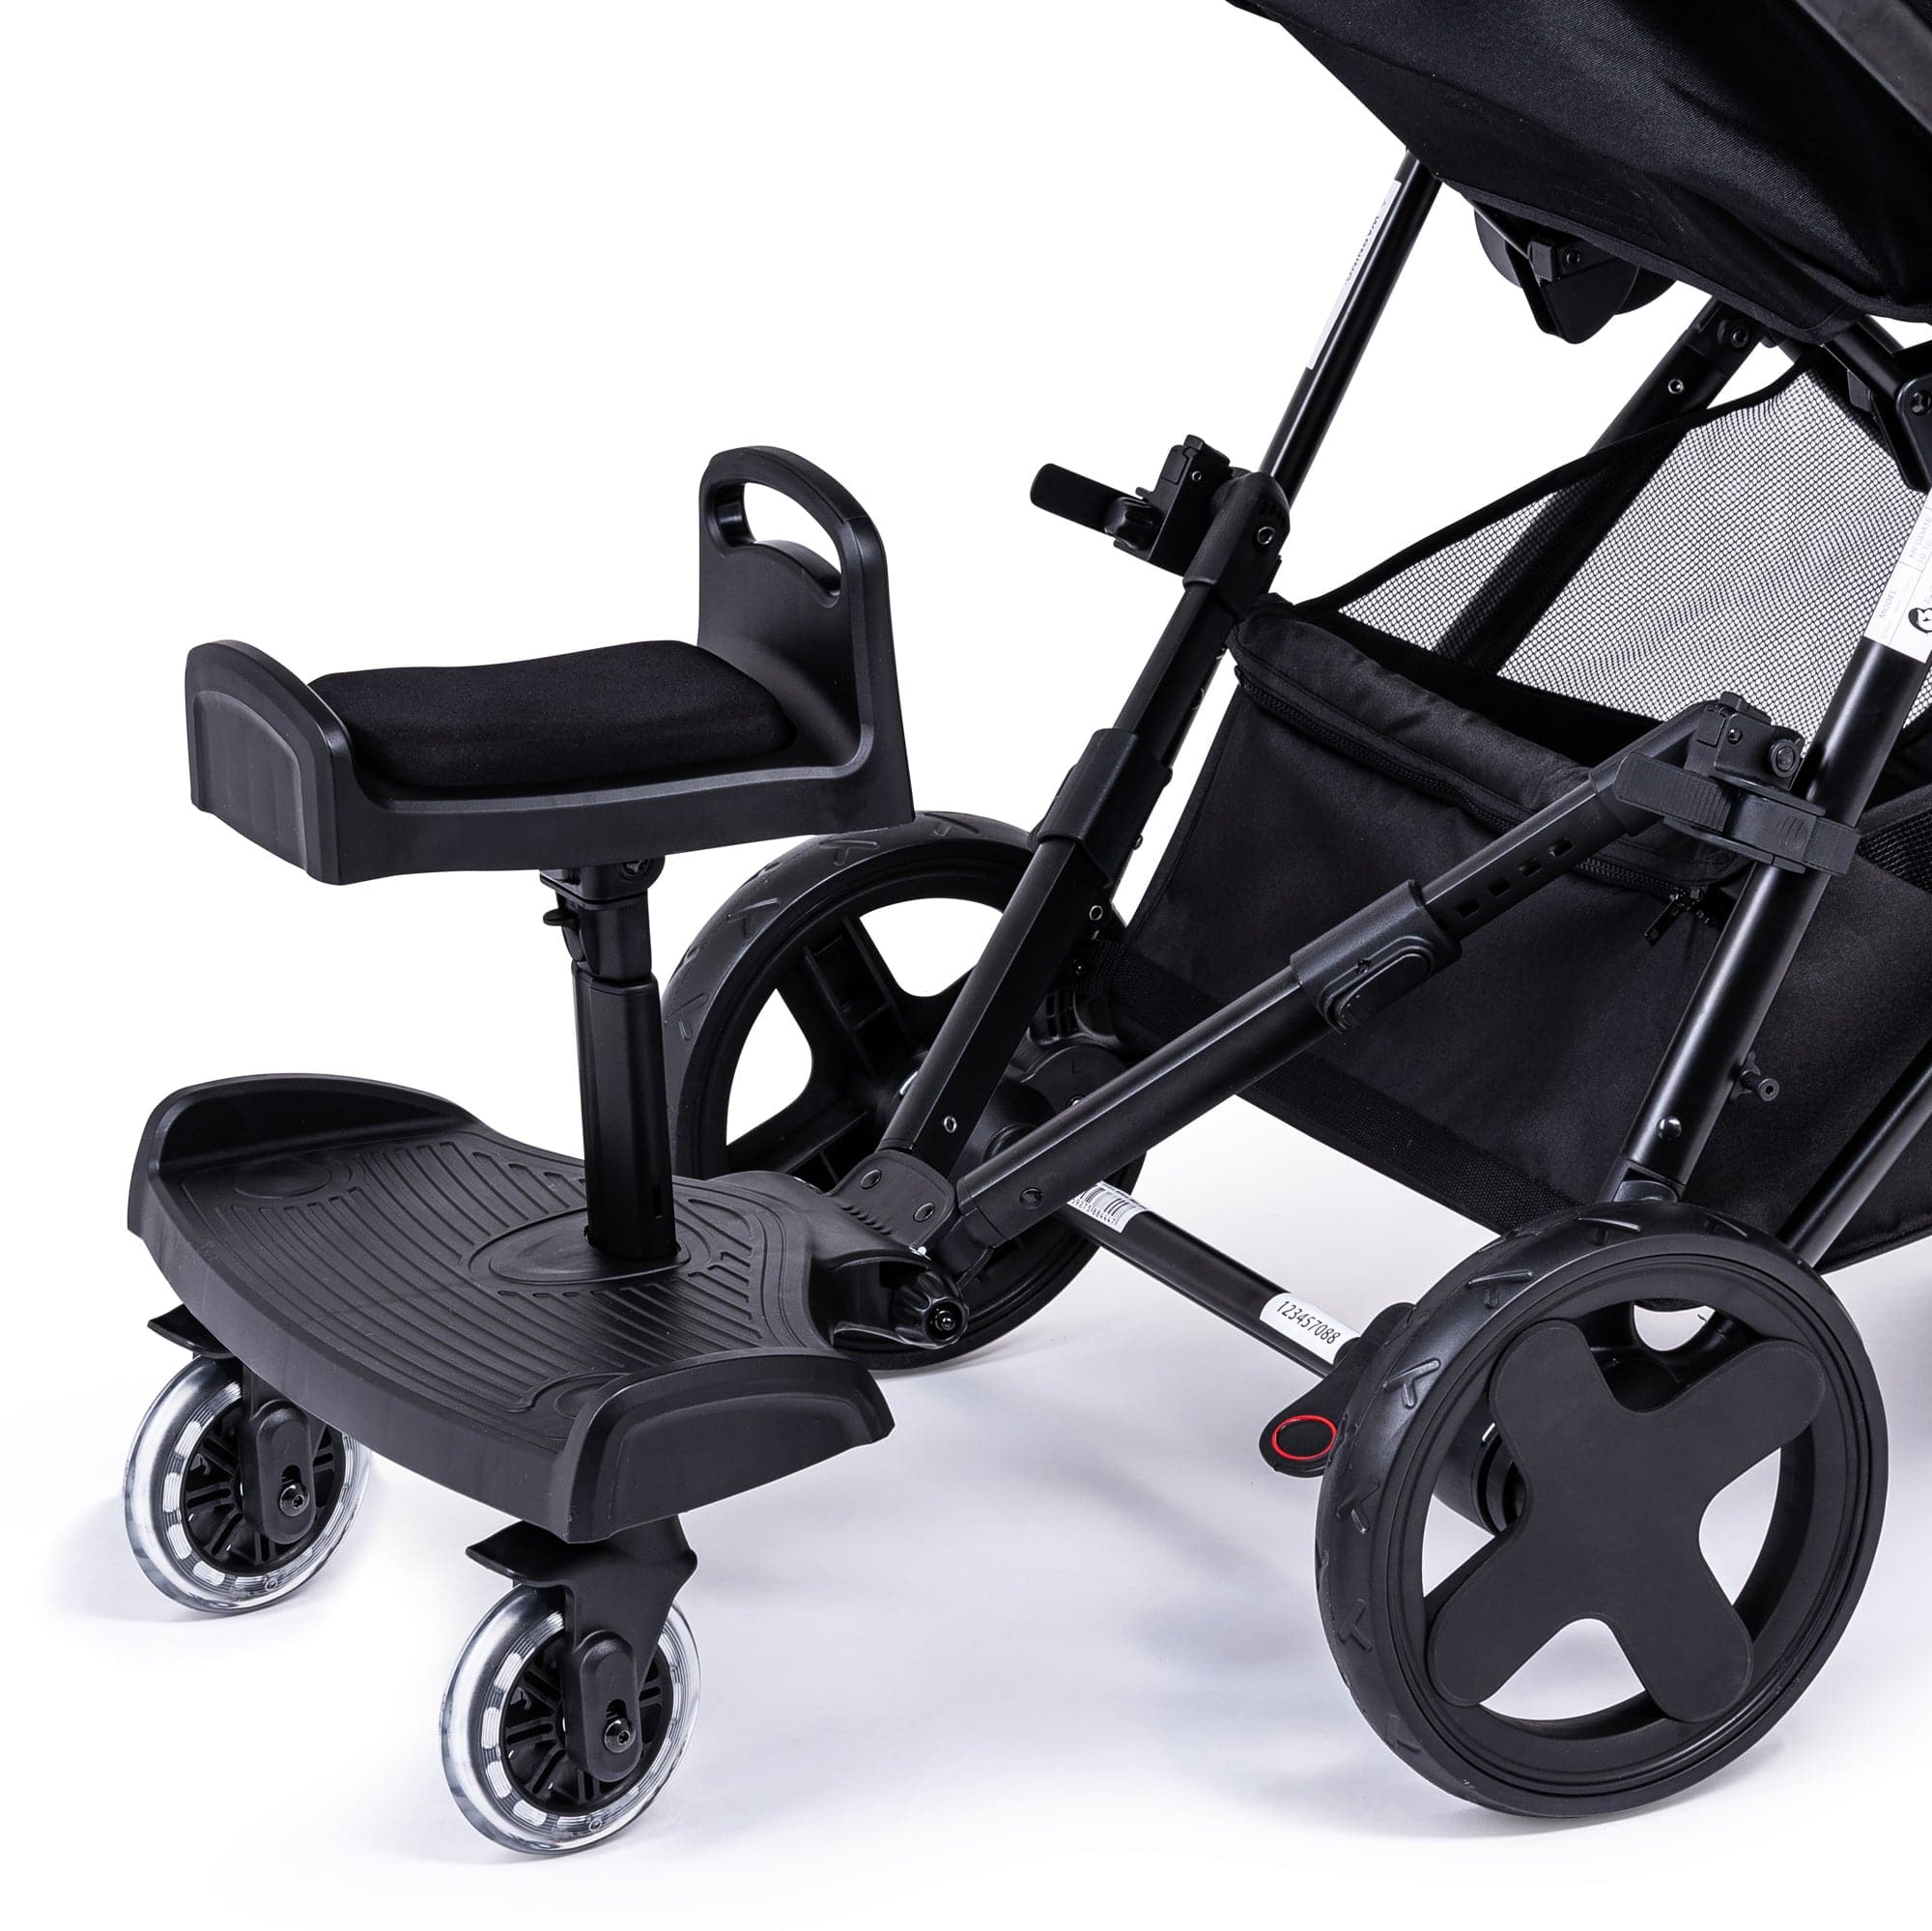 Ride On Board with Seat Compatible with Little Shield - For Your Little One